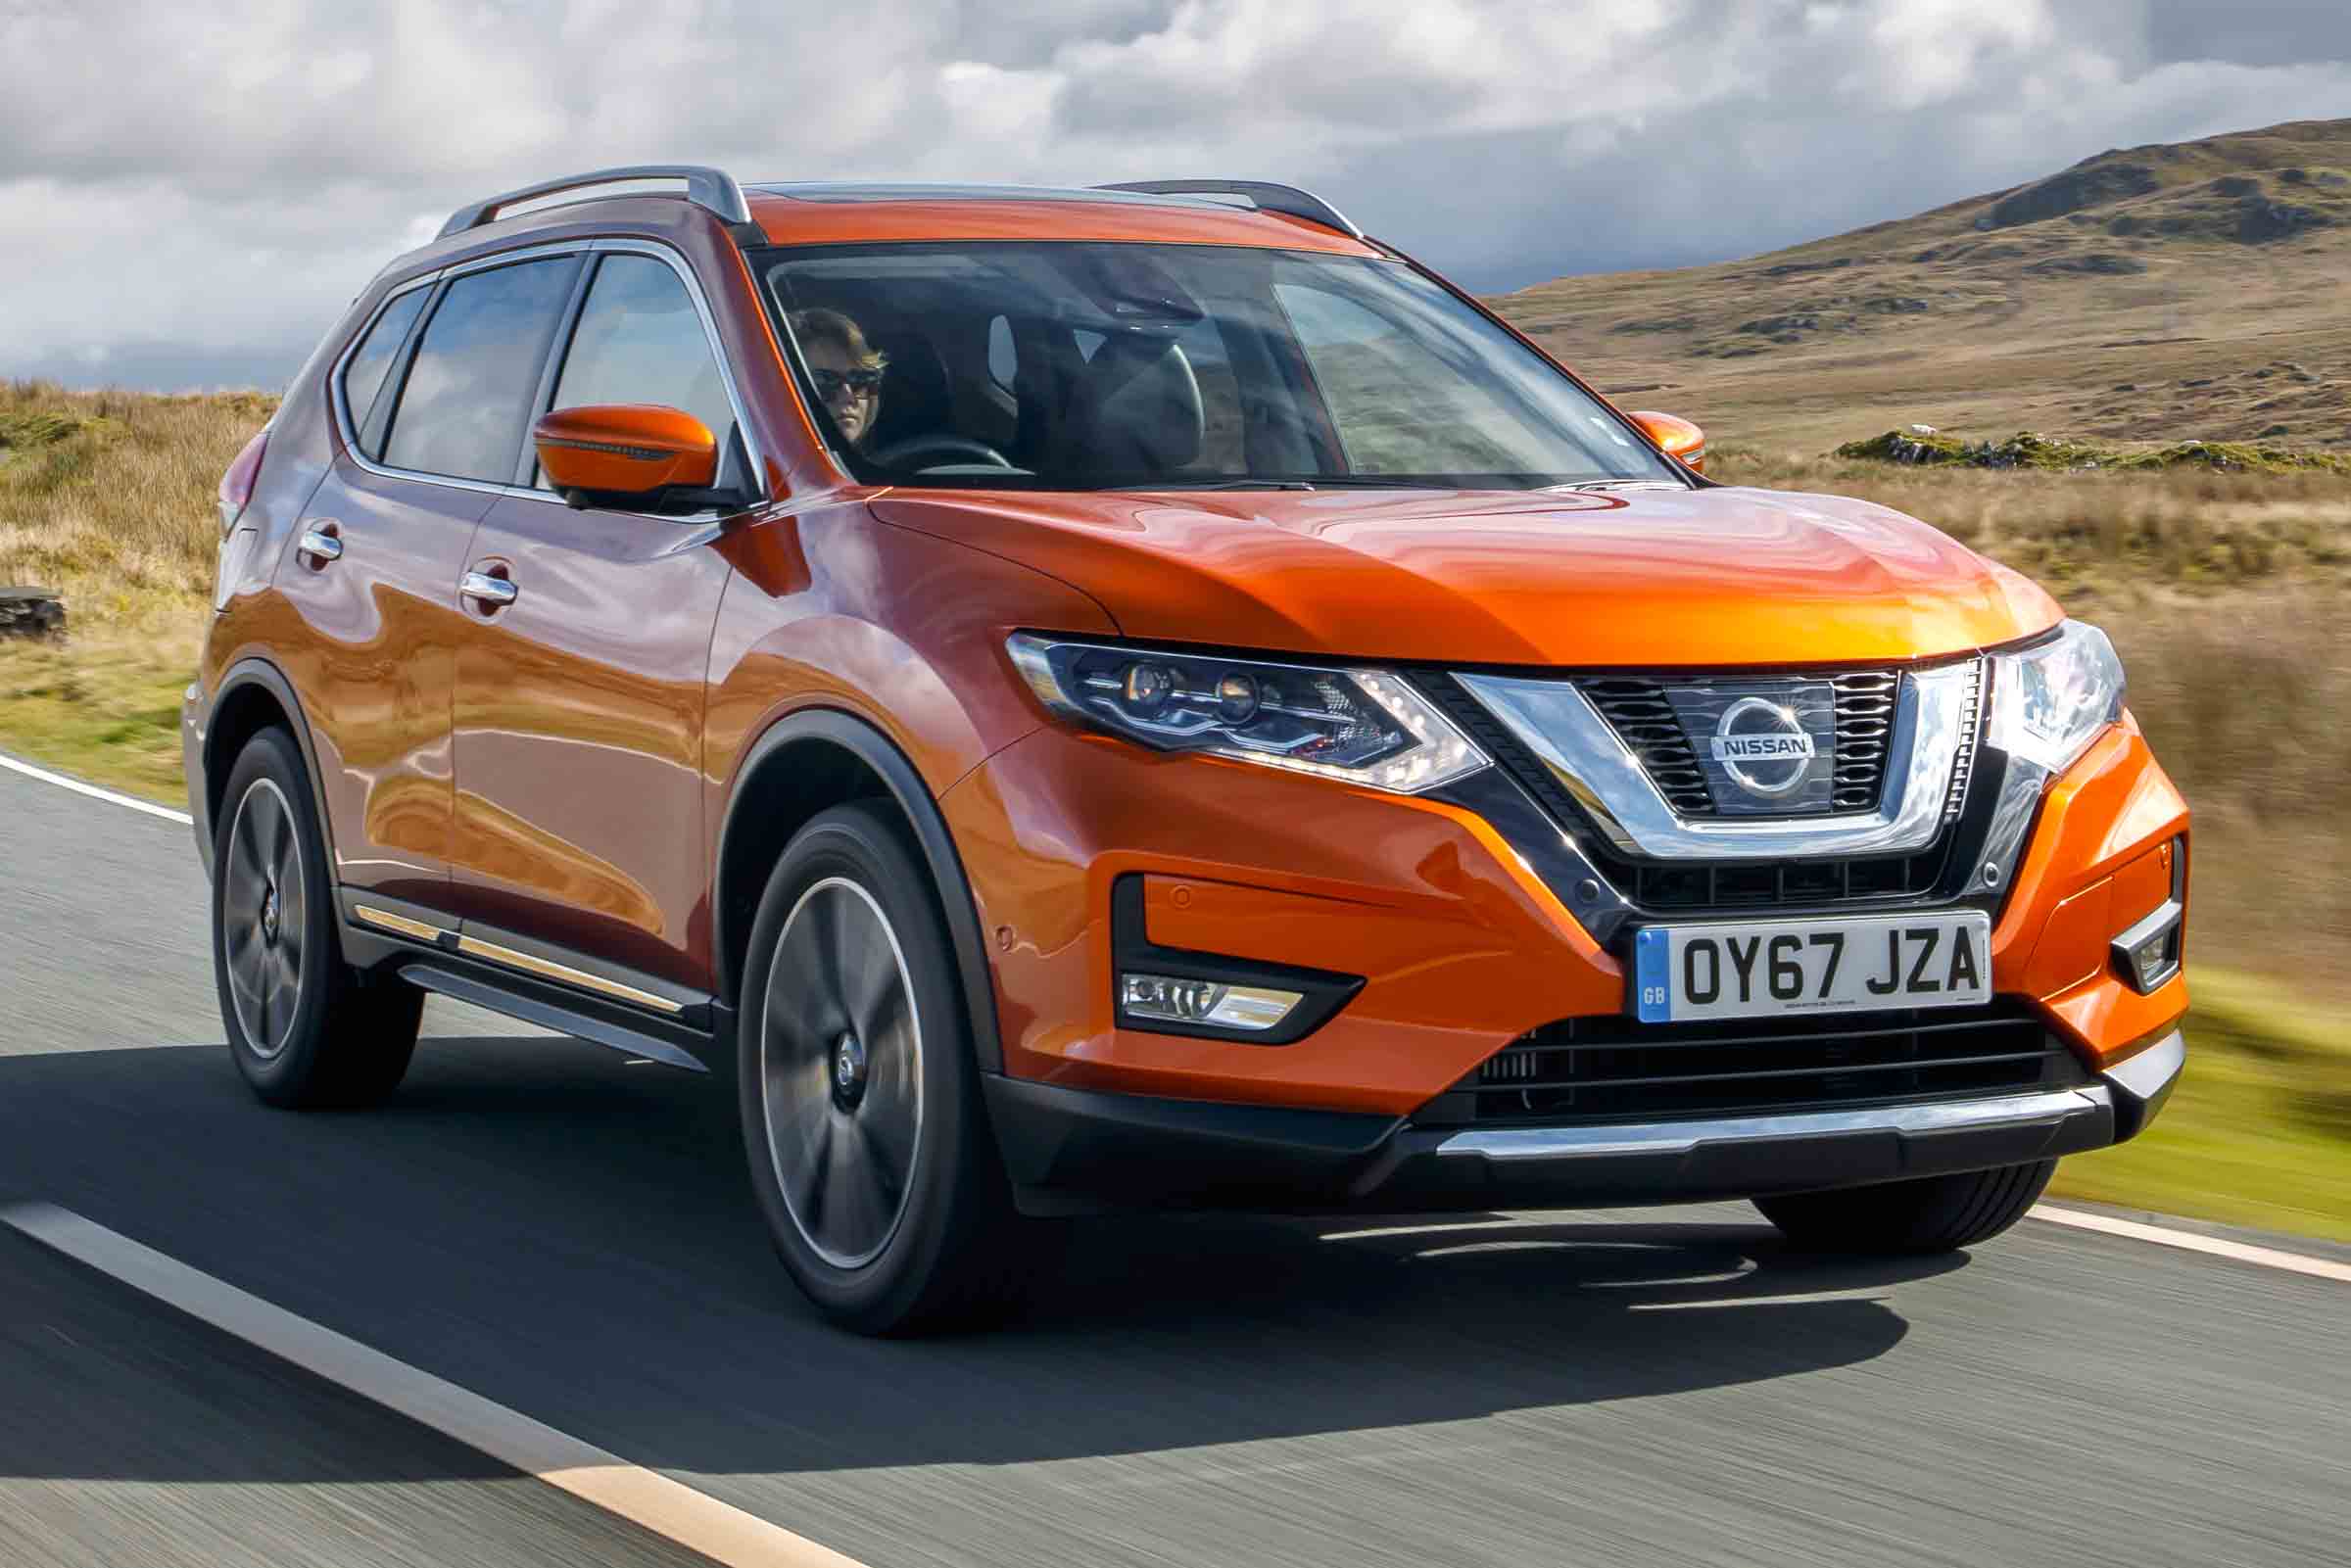 Nissan XTrail SUV facelift pricing and details announced